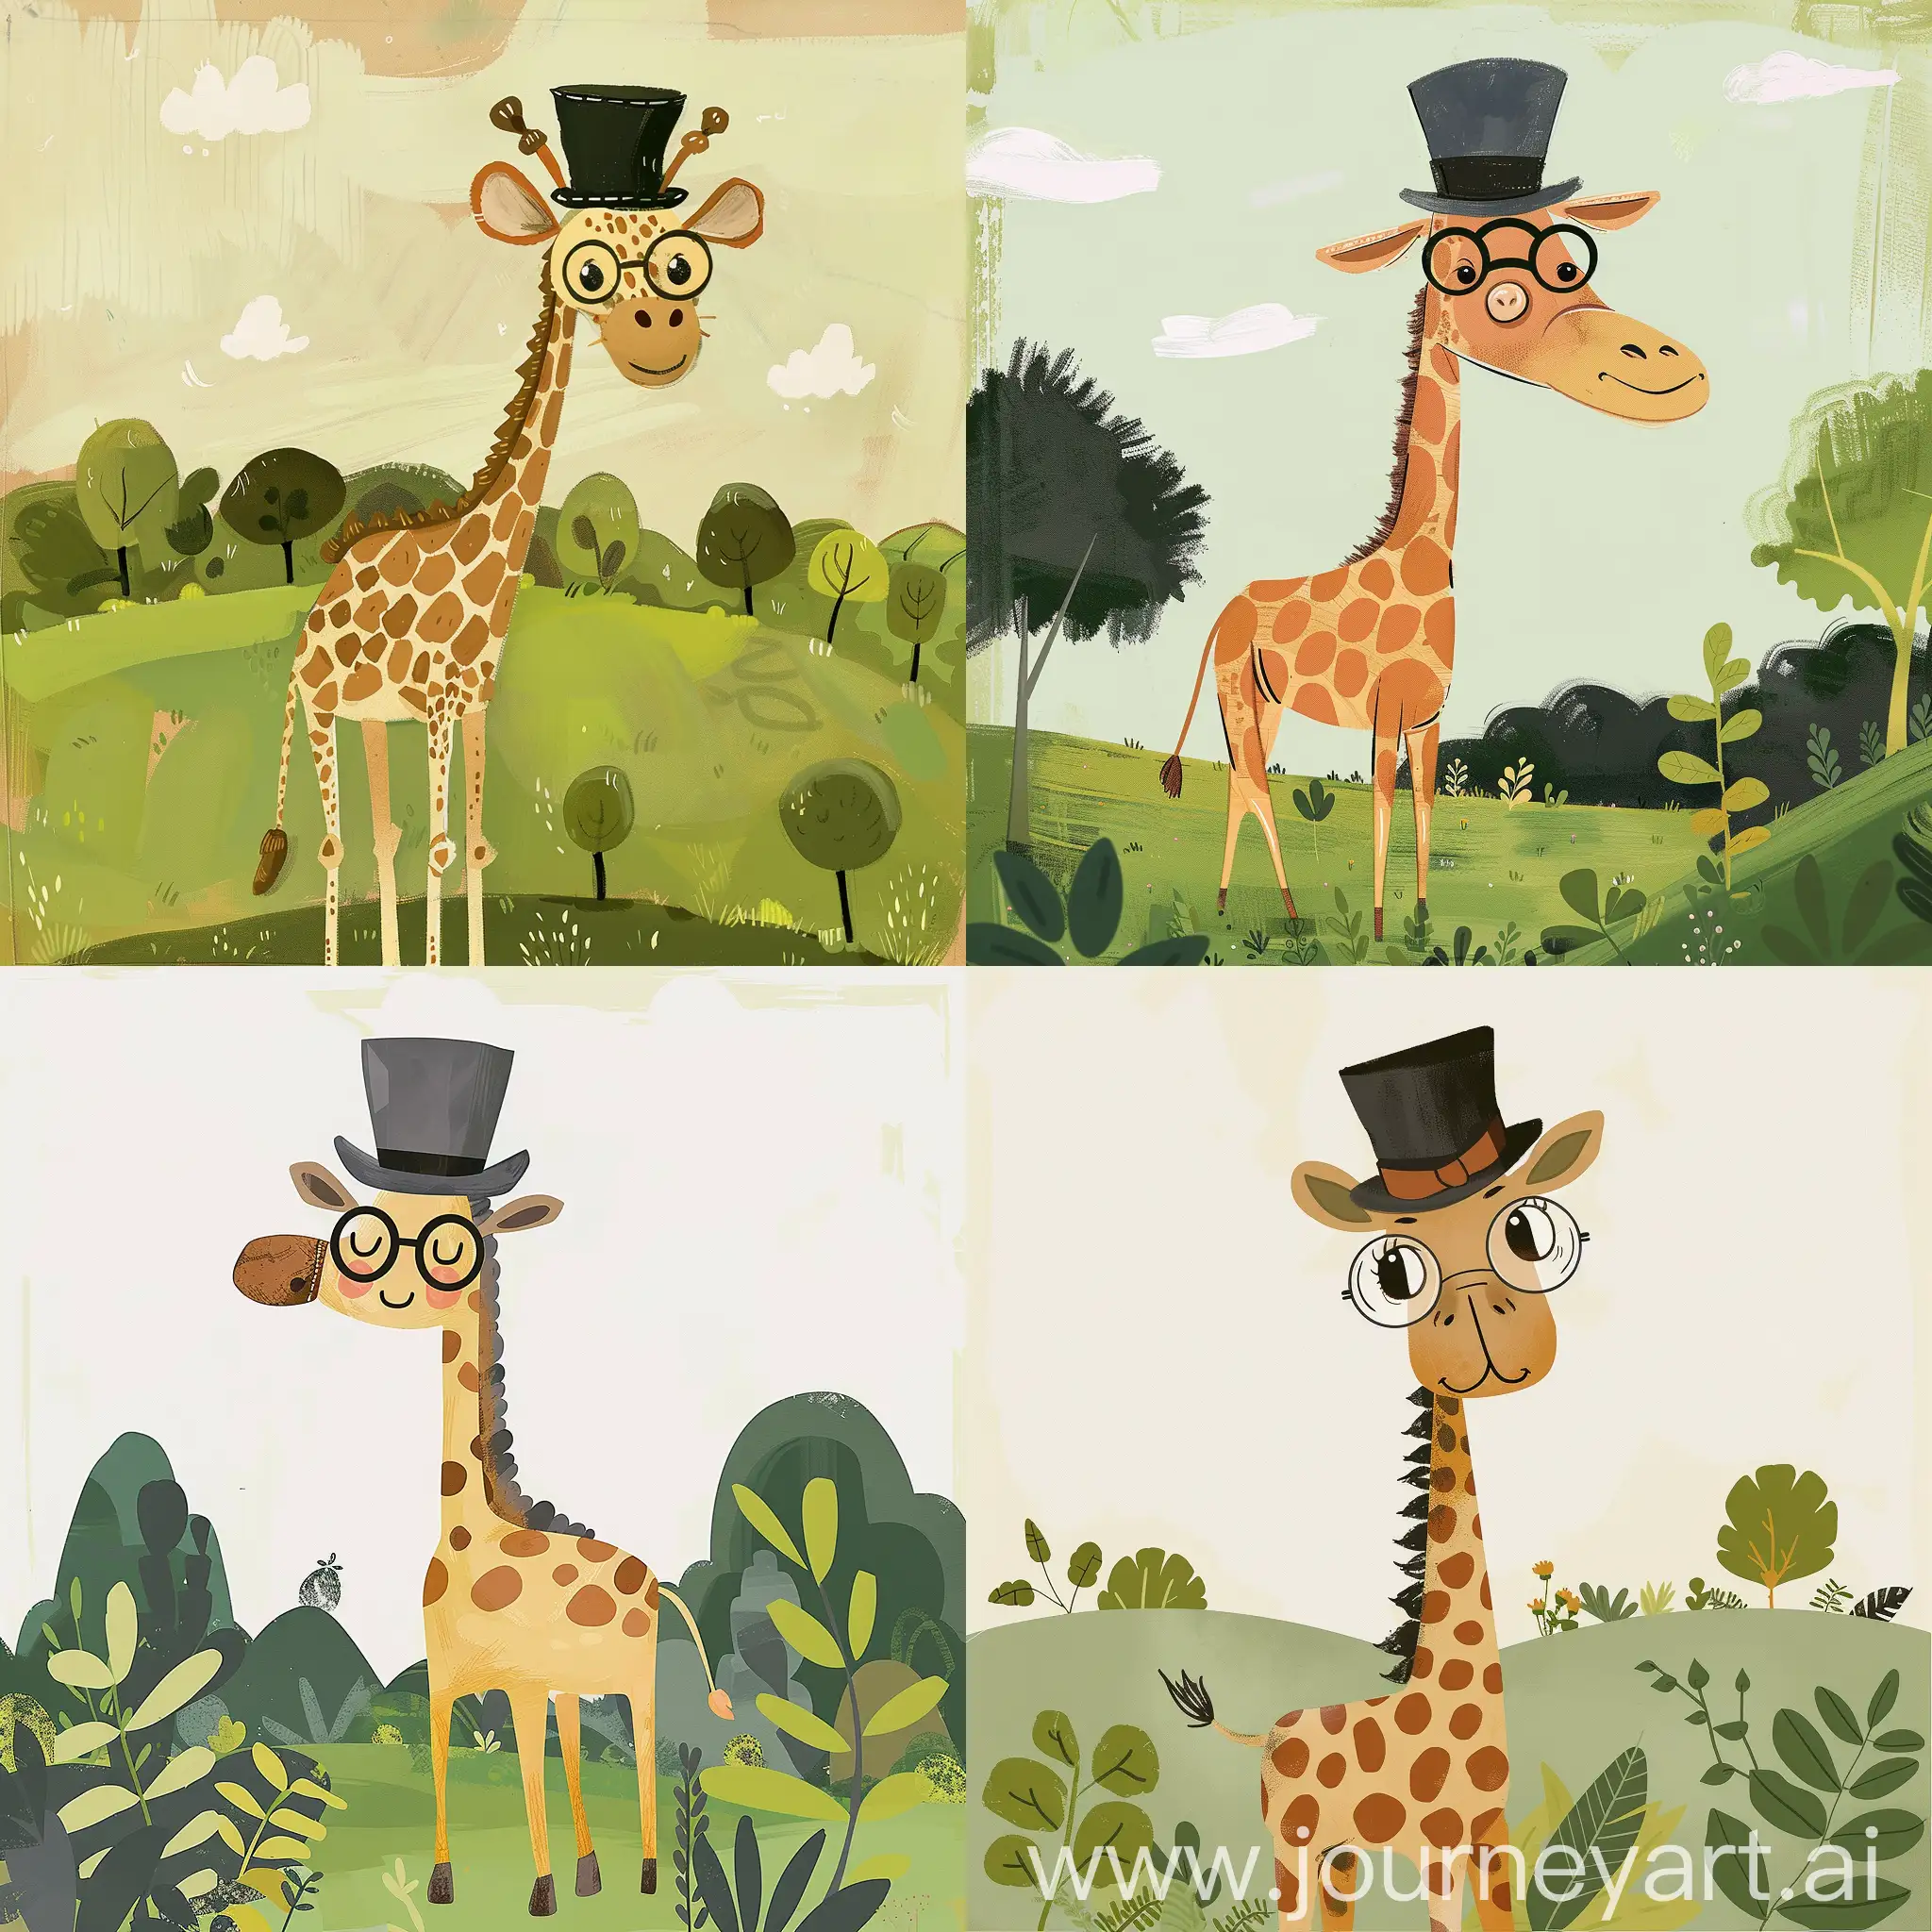 A delightful minimalist illustration of a charming giraffe wearing a top hat and round glasses. The giraffe is standing in a simple, lush green landscape, with a touch of whimsy and innocence in its expression. The overall aesthetic of the painting is clean, with a limited soft color palette, emphasizing the giraffe's adorable appearance and the playful atmosphere of the scene.